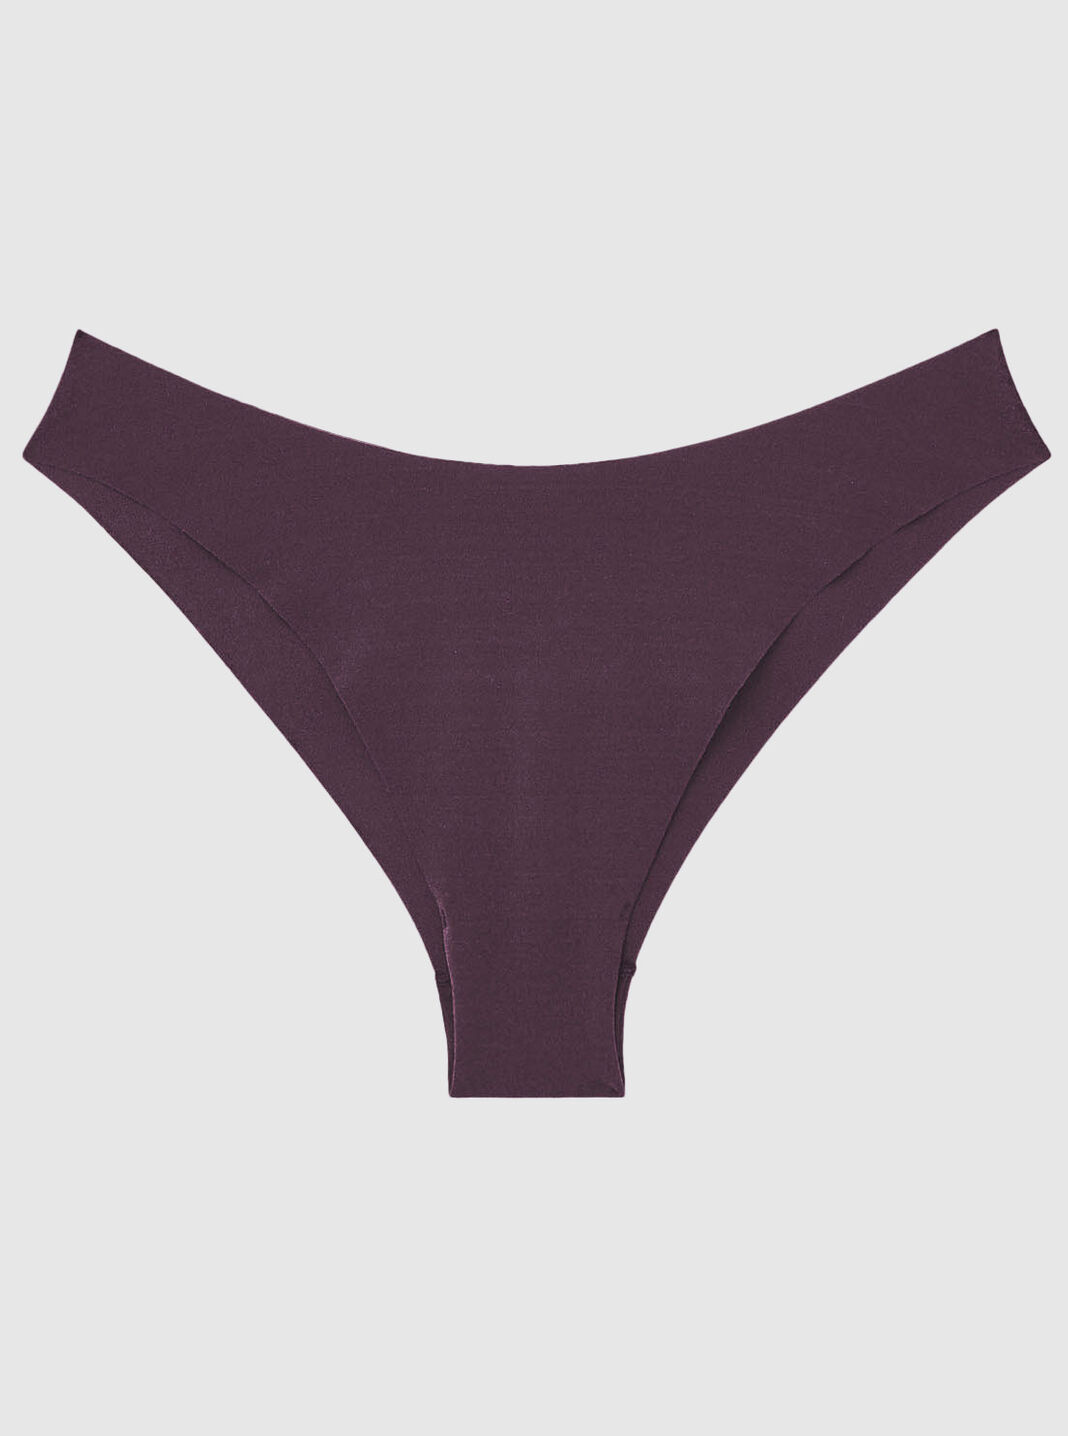 Barely There Pantieslace Sexy Briefs For Women - Seamless Low-rise  Transparent Panties